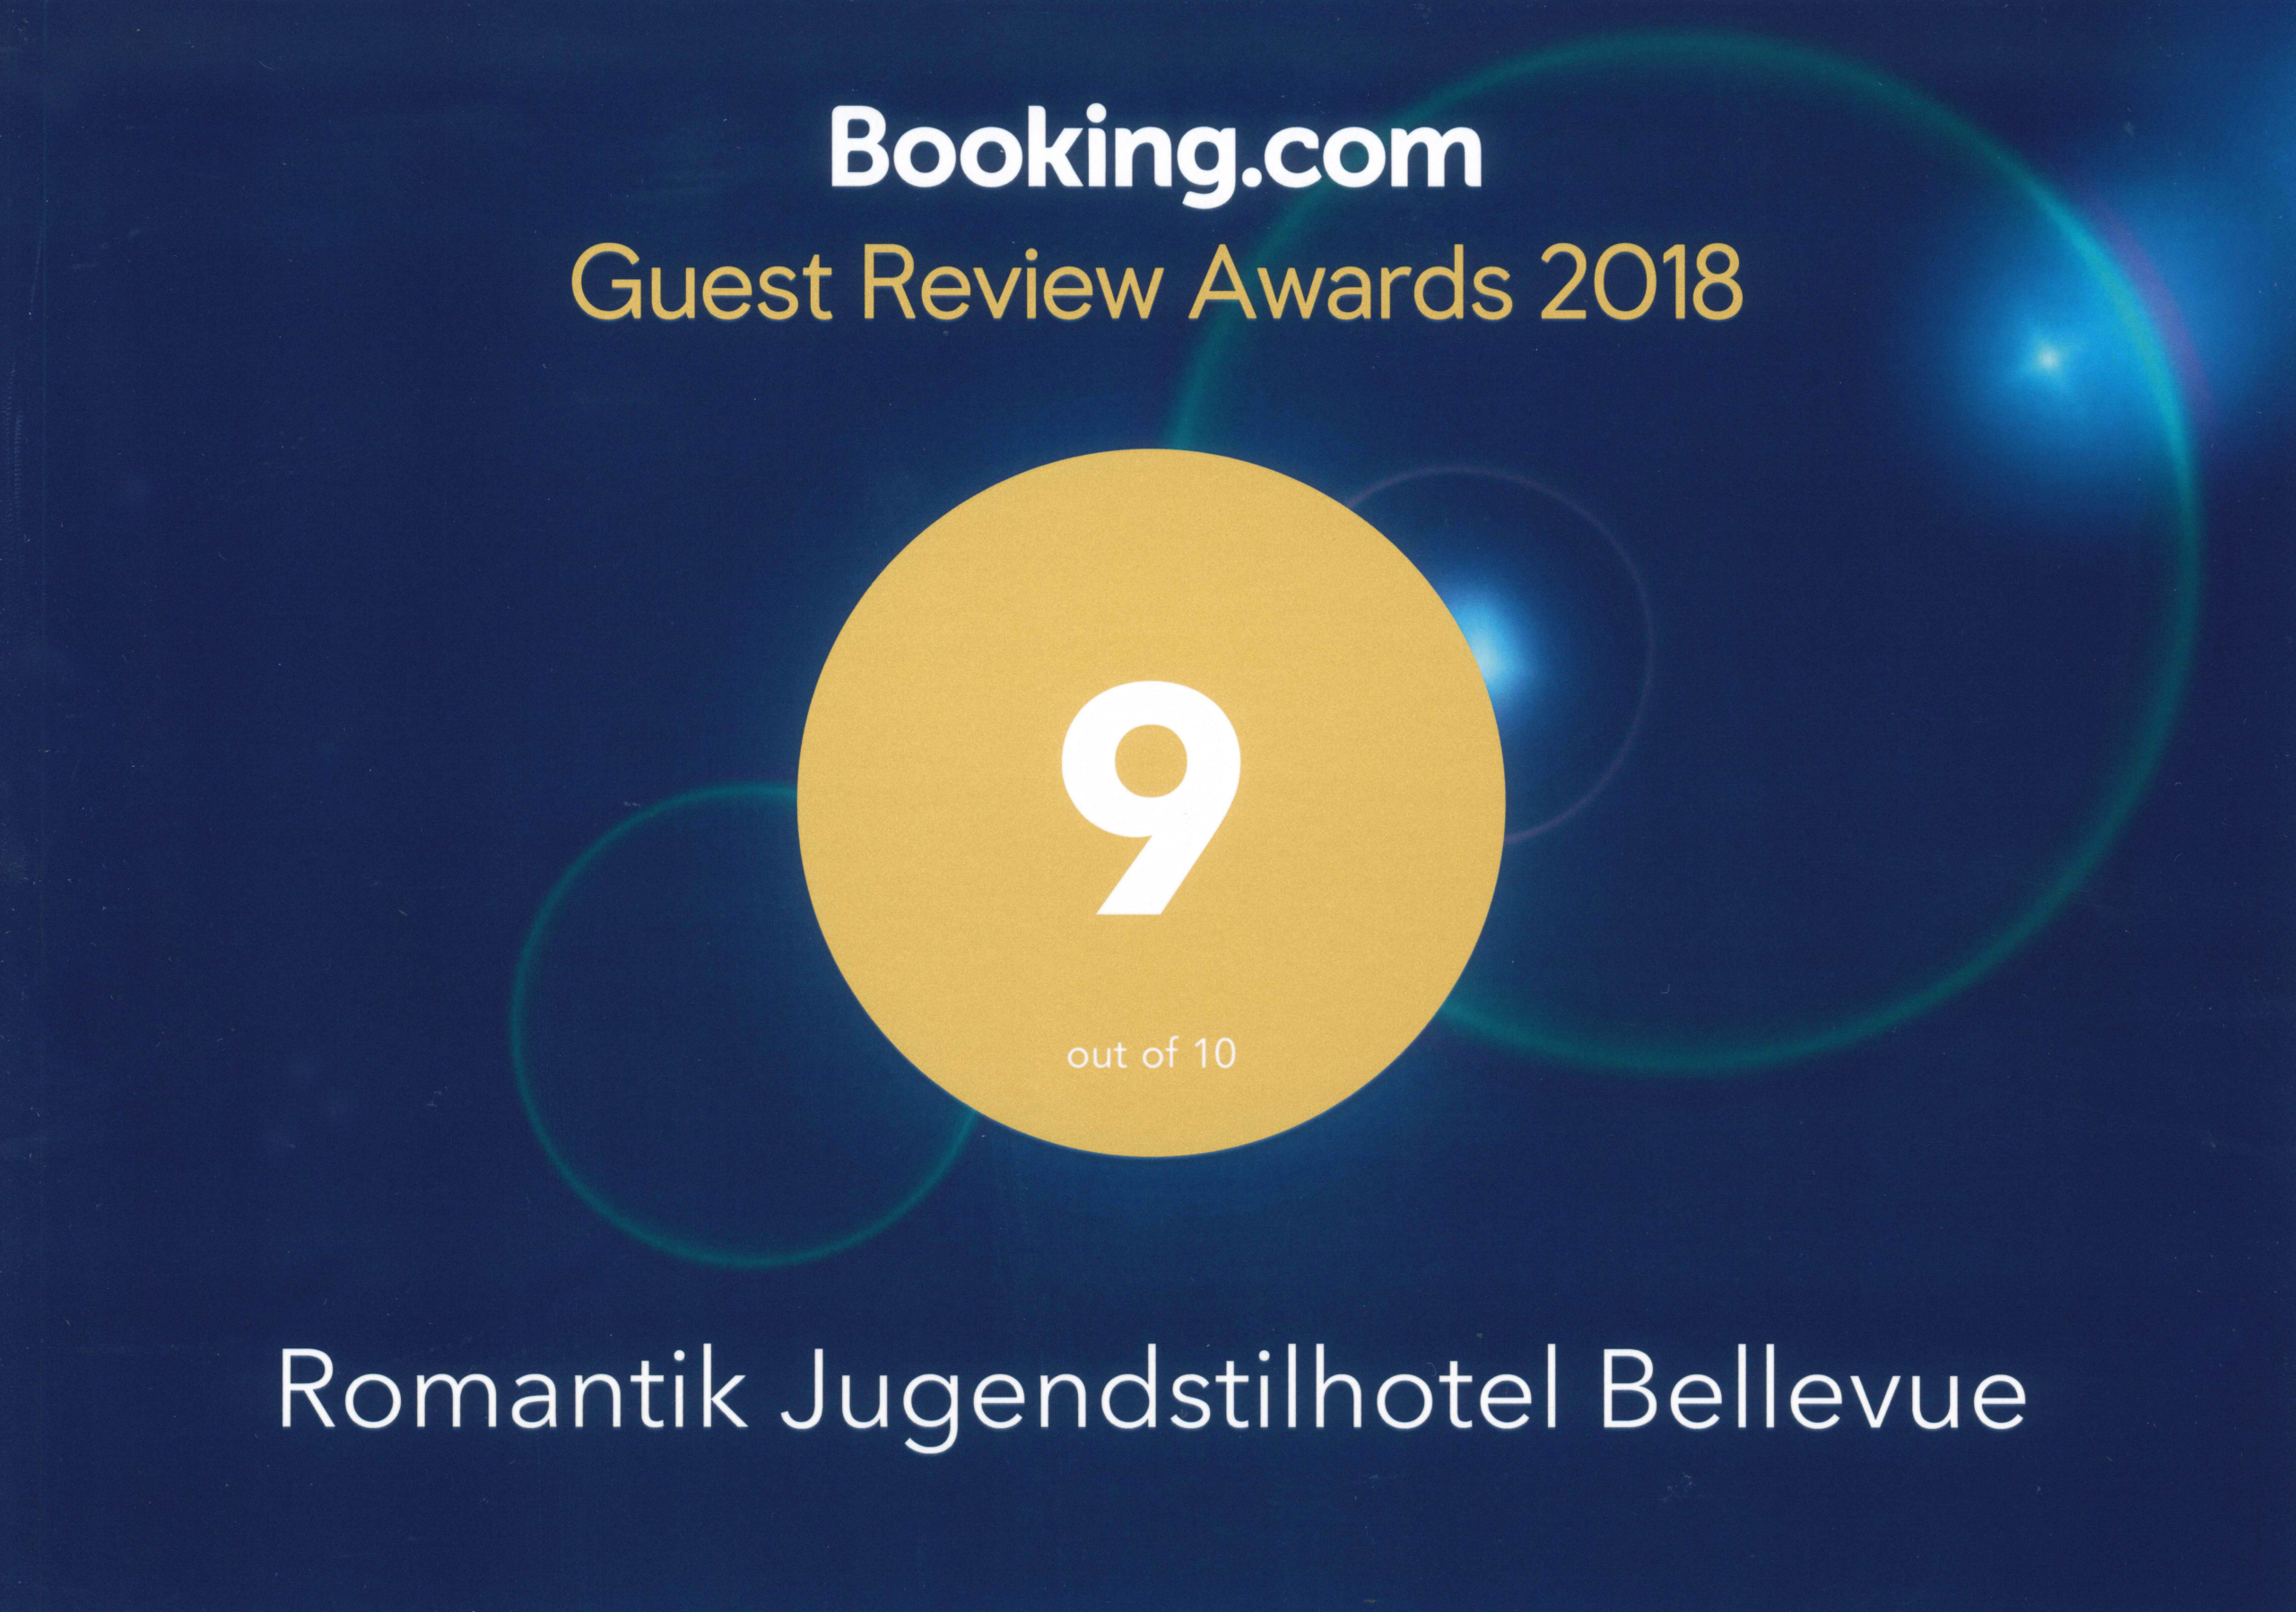 guest review awards 2018